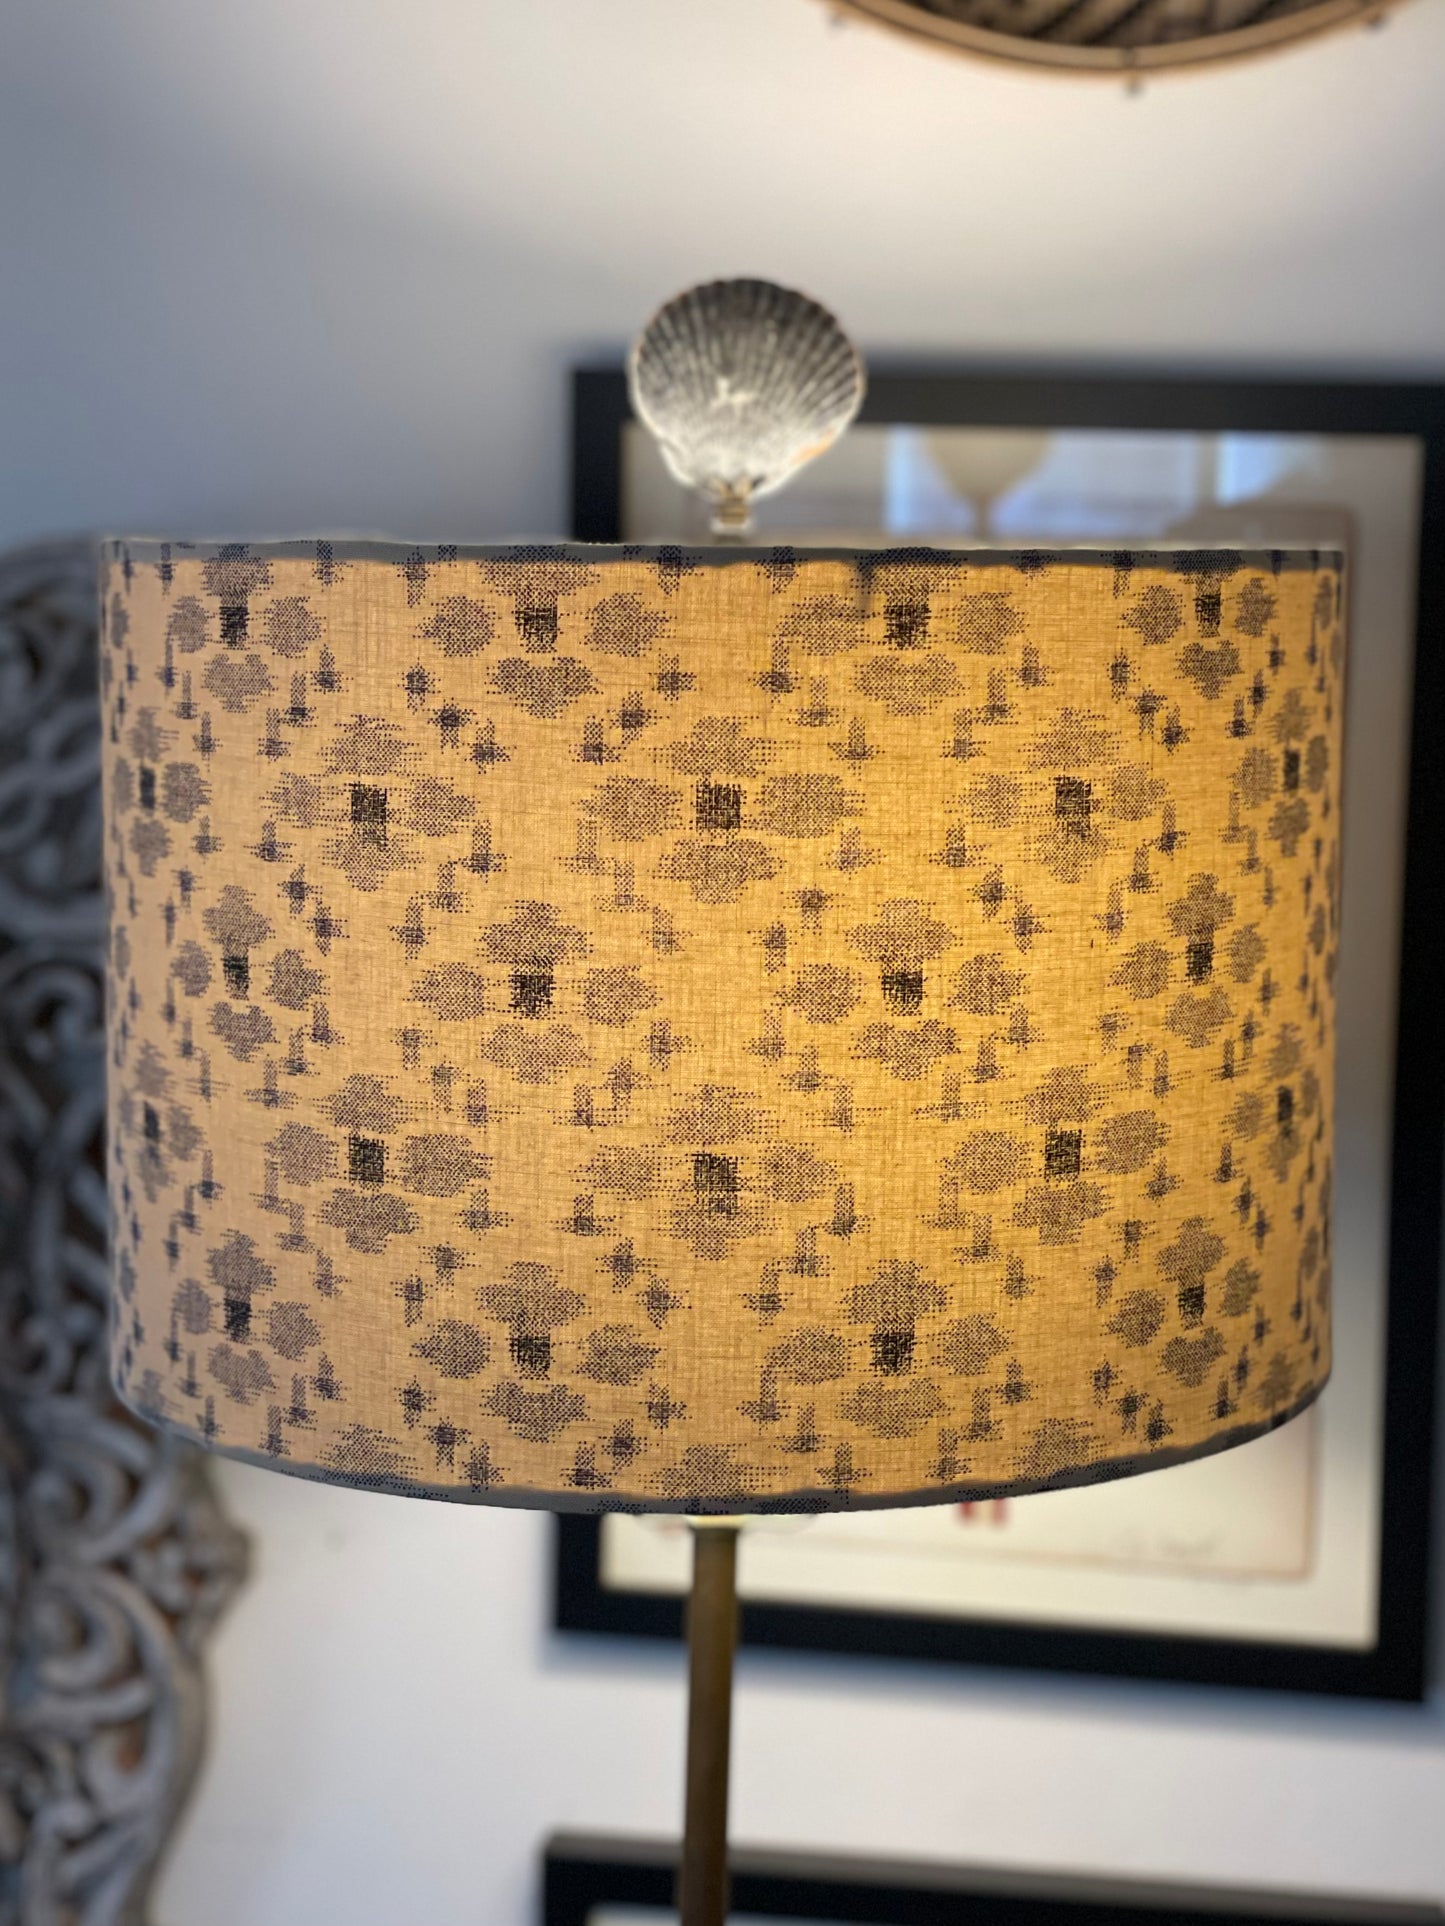 12 Inch Drum Shade. Traditional Japanese Fabric. Sand with Blue-Gray "Igeta" Grid Pattern.